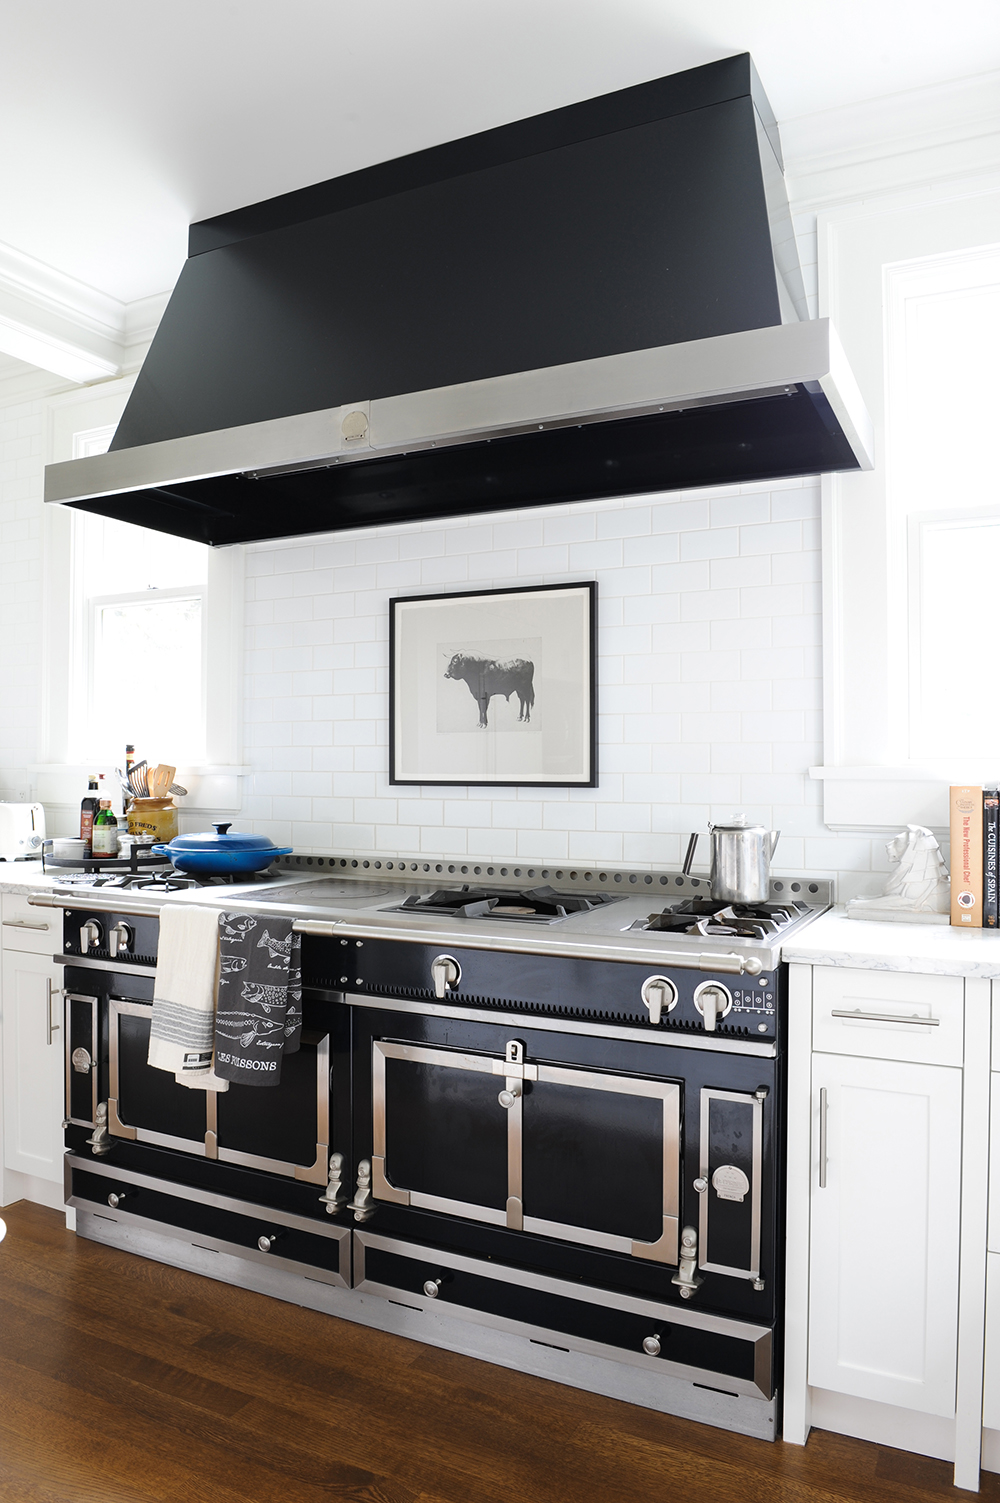 This showpiece range and hood are a cook's dream.